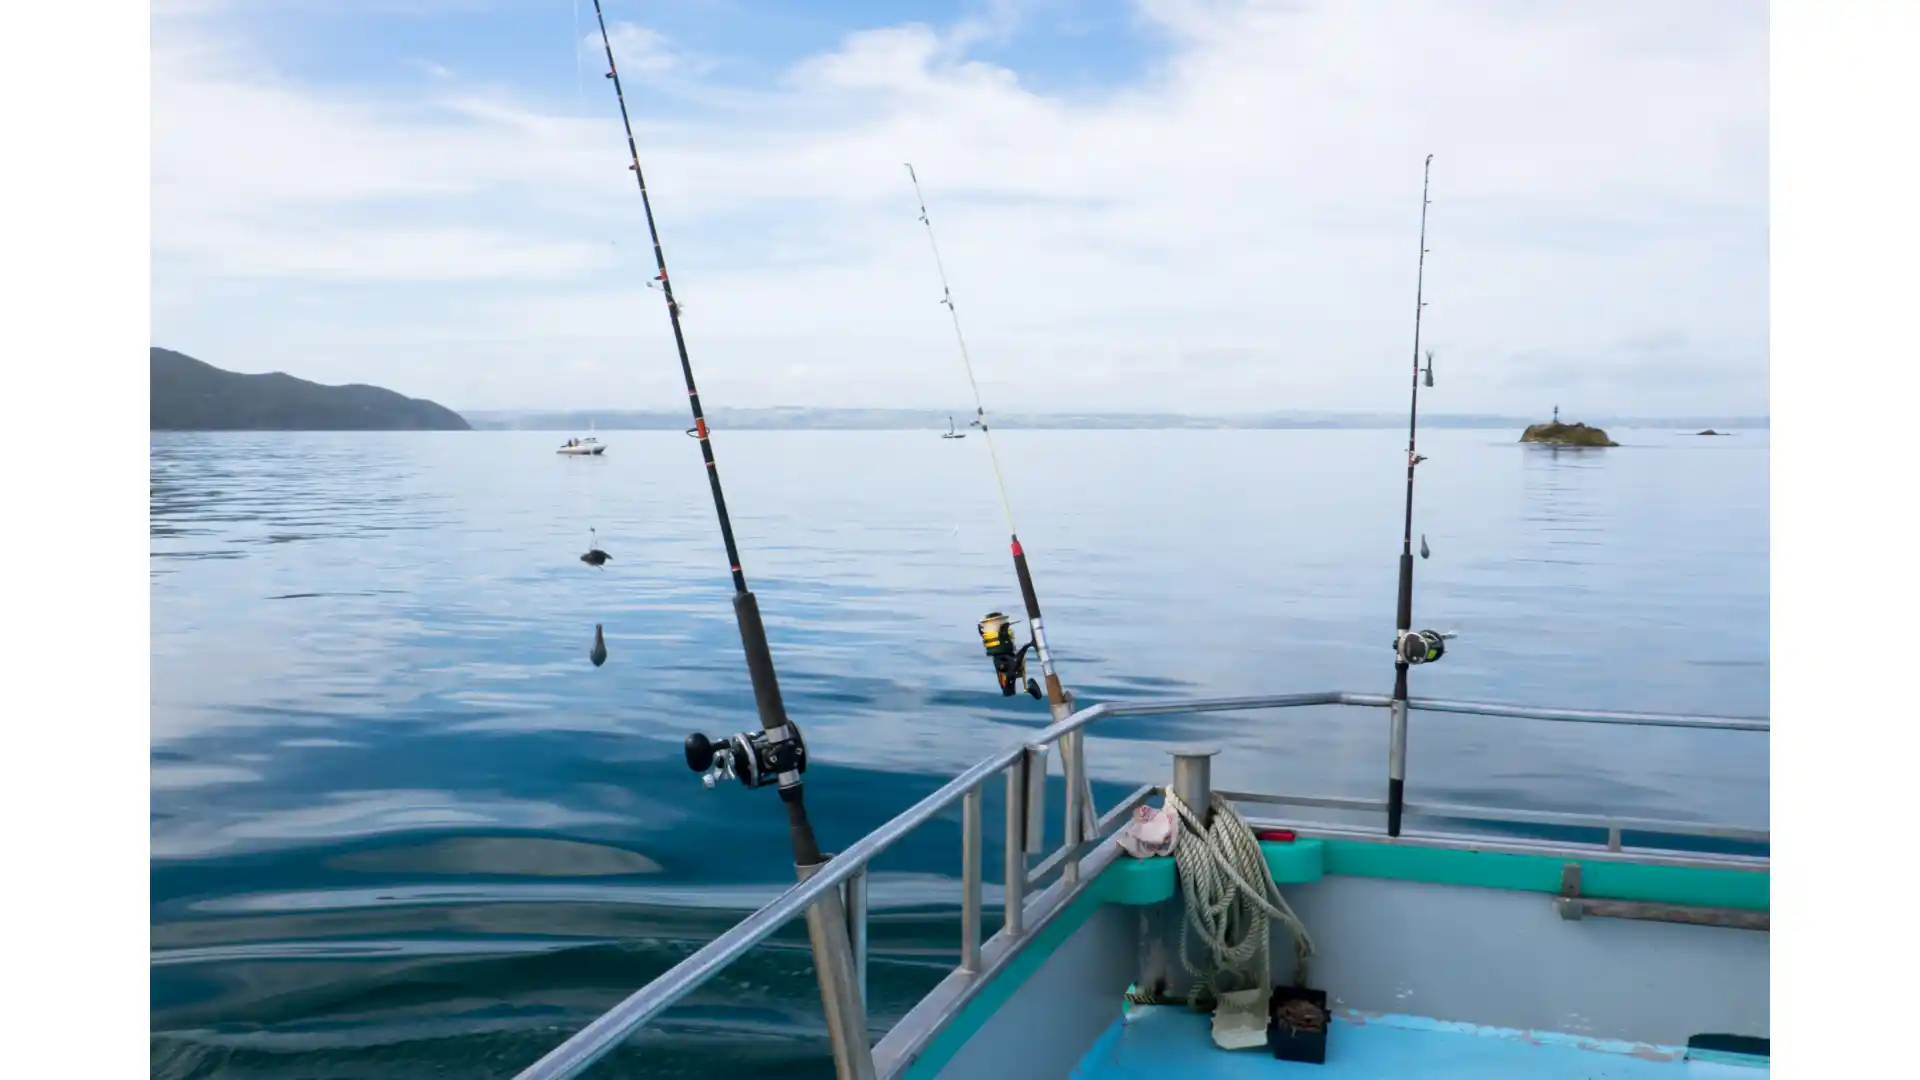 GK Palms Resort Fishing spots and charters in the area